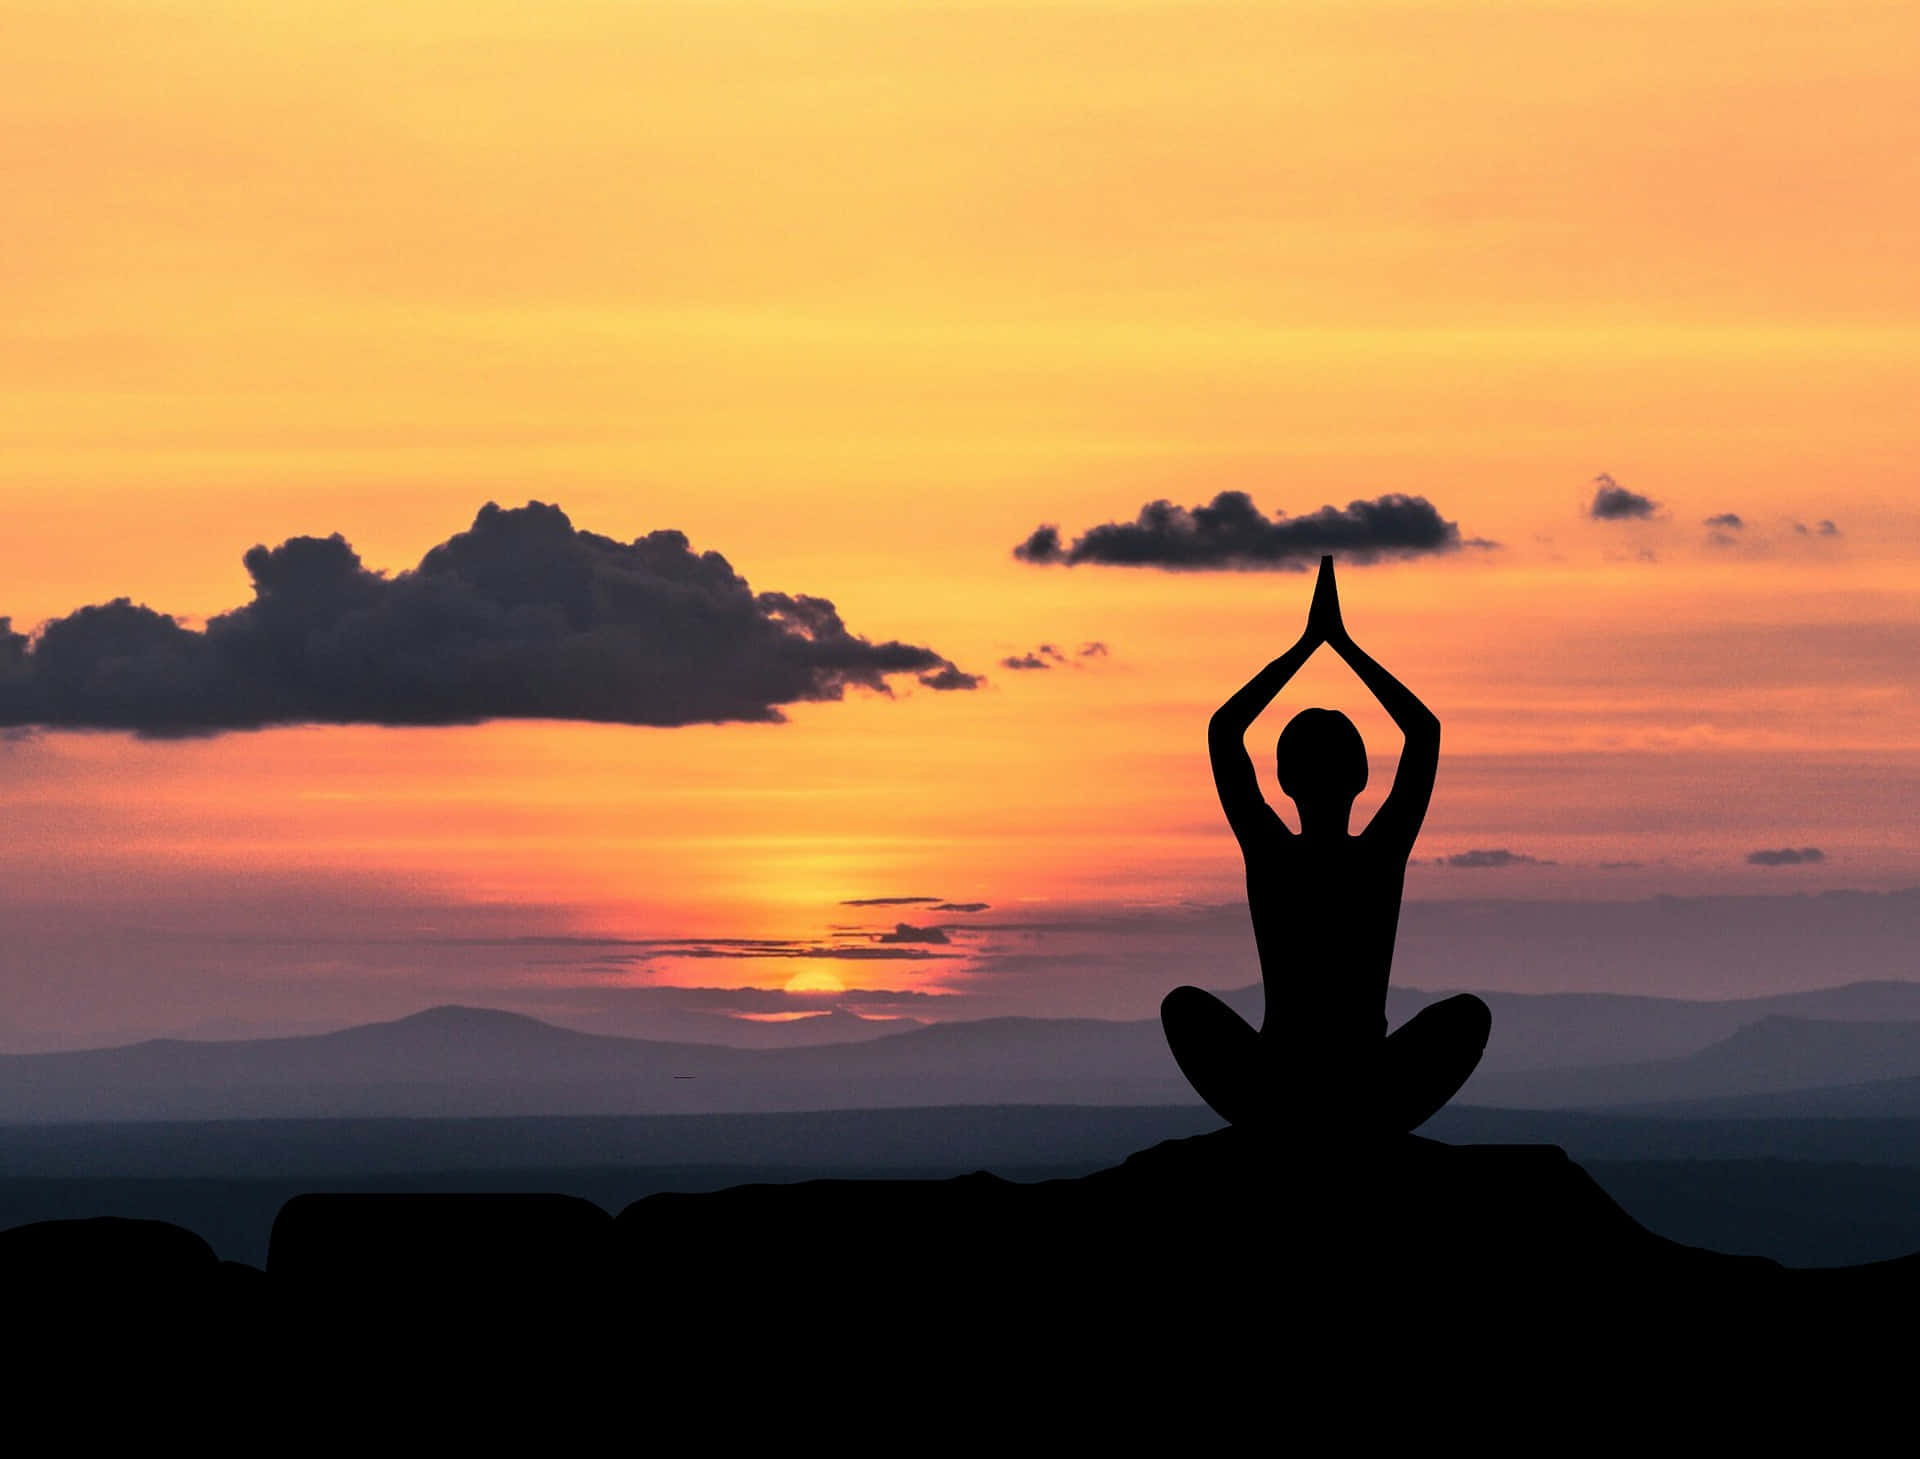 A Silhouette Of A Person Doing Yoga At Sunset